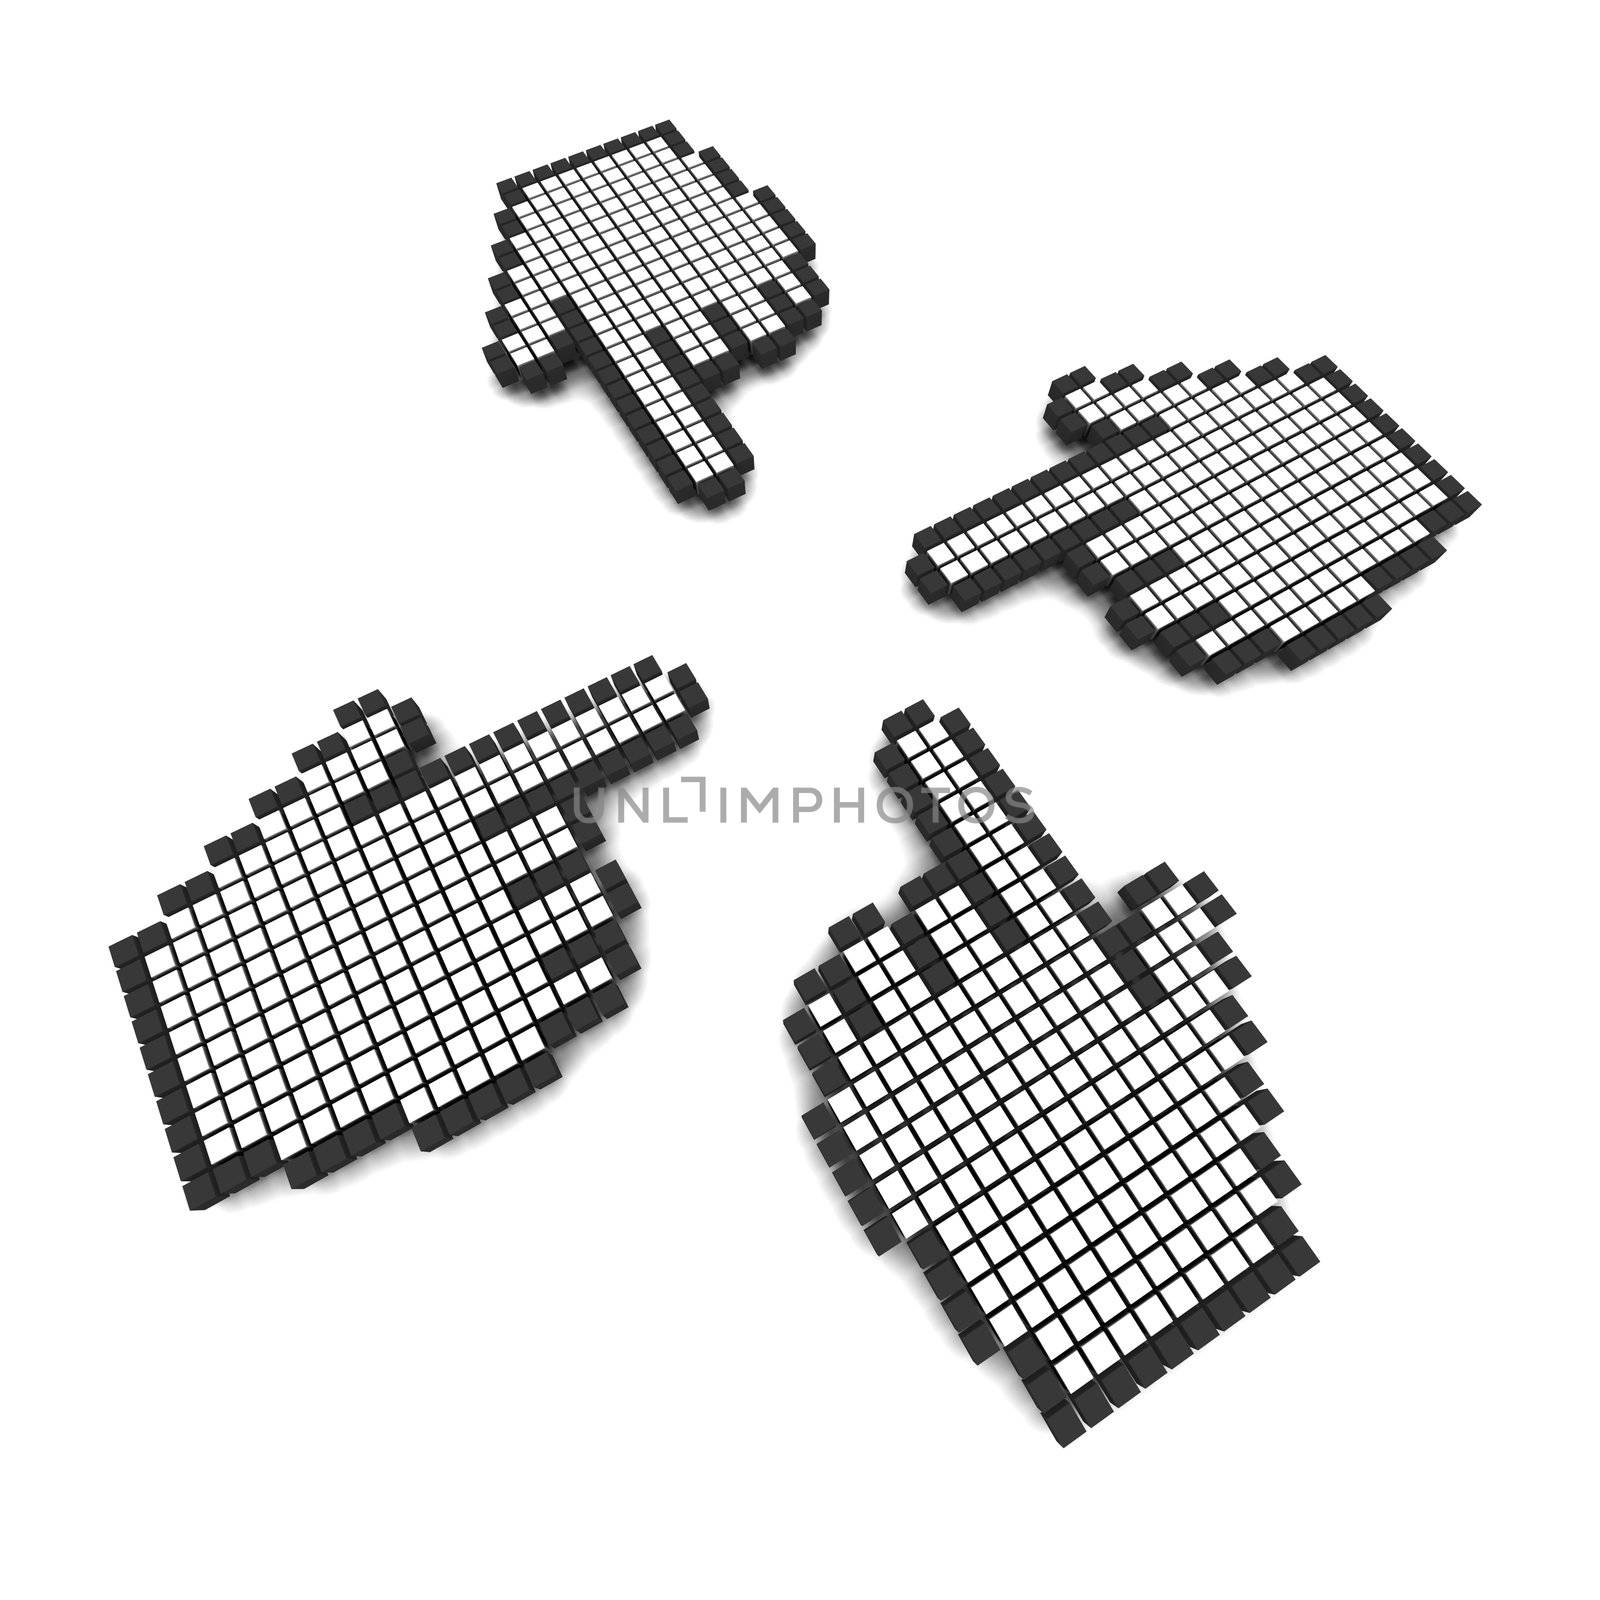 Computer hand cursors by skvoor